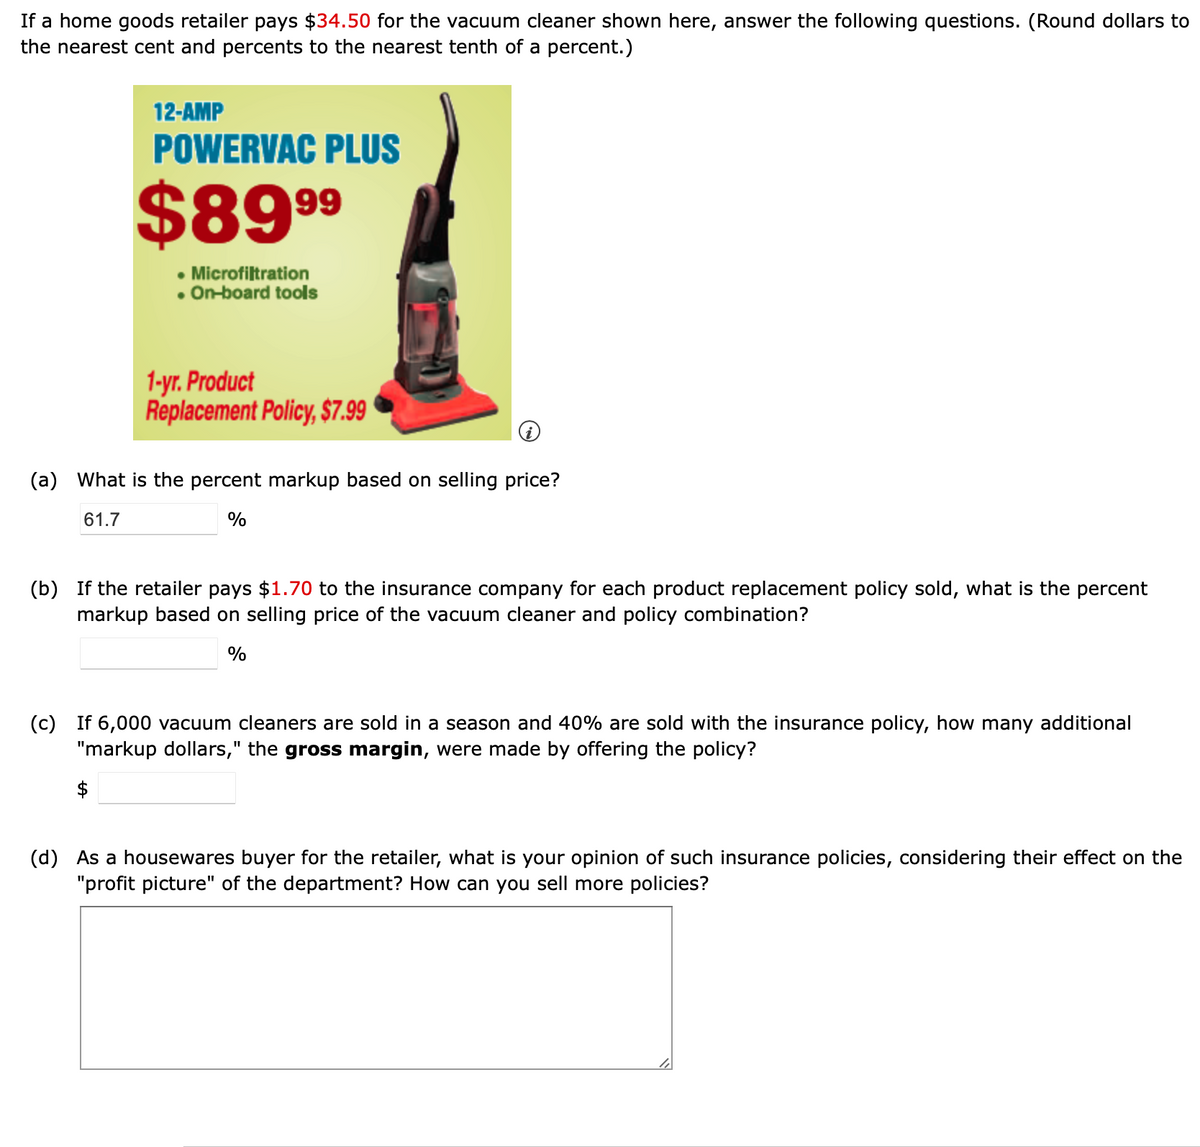 If a home goods retailer pays $34.50 for the vacuum cleaner shown here, answer the following questions. (Round dollars to
the nearest cent and percents to the nearest tenth of a percent.)
12-AMP
POWERVAC PLUS
$899
• Microfiltration
• On-board tools
1-yr. Product
Replacement Policy, $7.99
(a) What is the percent markup based on selling price?
61.7
(b) If the retailer pays $1.70 to the insurance company for each product replacement policy sold, what is the percent
markup based on selling price of the vacuum cleaner and policy combination?
%
(c) If 6,000 vacuum cleaners are sold in a season and 40% are sold with the insurance policy, how many additional
"markup dollars," the gross margin, were made by offering the policy?
(d) As a housewares buyer for the retailer, what is your opinion of such insurance policies, considering their effect on the
"profit picture" of the department? How can you sell more policies?
